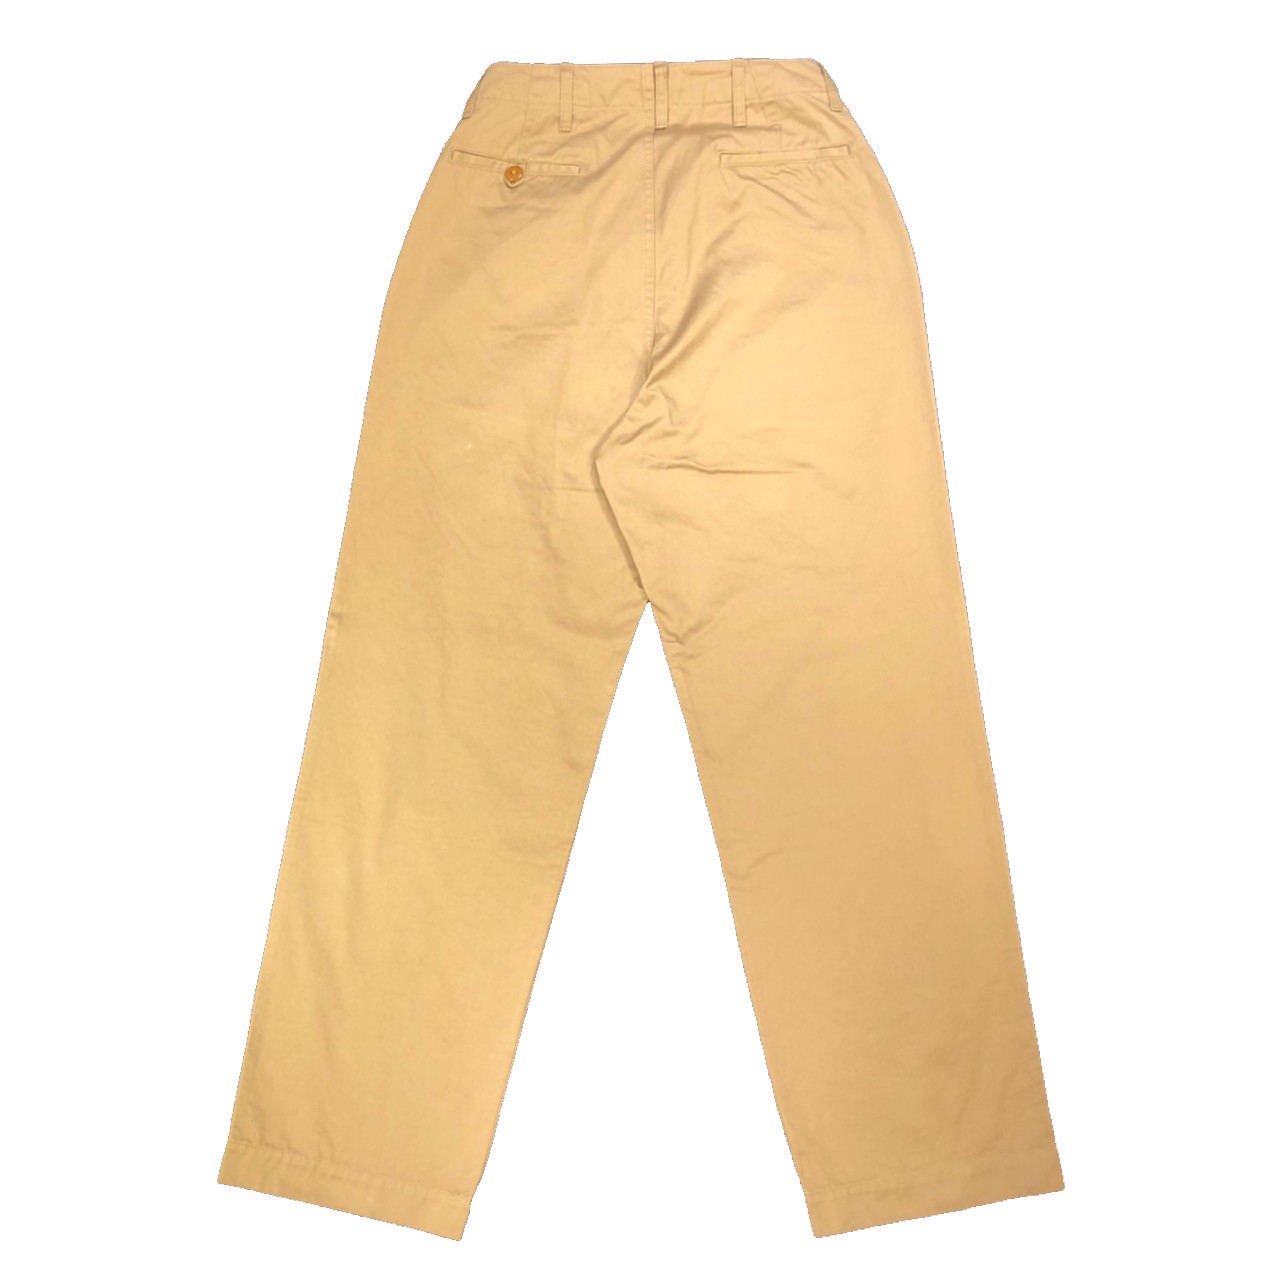 Hummingbirds'hill shop / Nigel Cabourn - BASIC CHINO WEST POINT